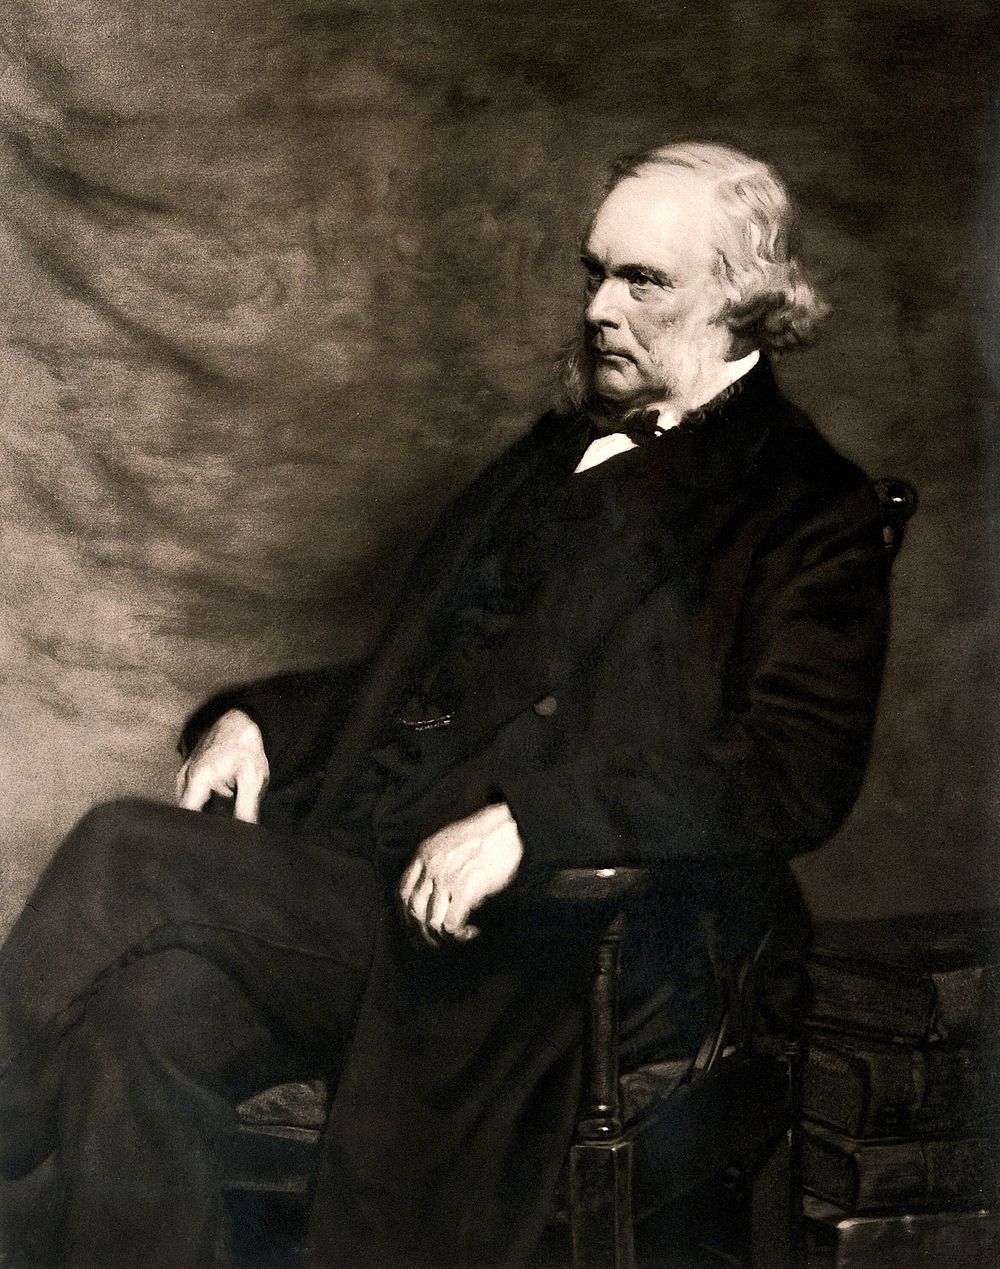 Joseph Lister, 1st Baron Lister. Photogravure by the Swan Electric Engraving Company, 1895, after J.H. Lorimer.